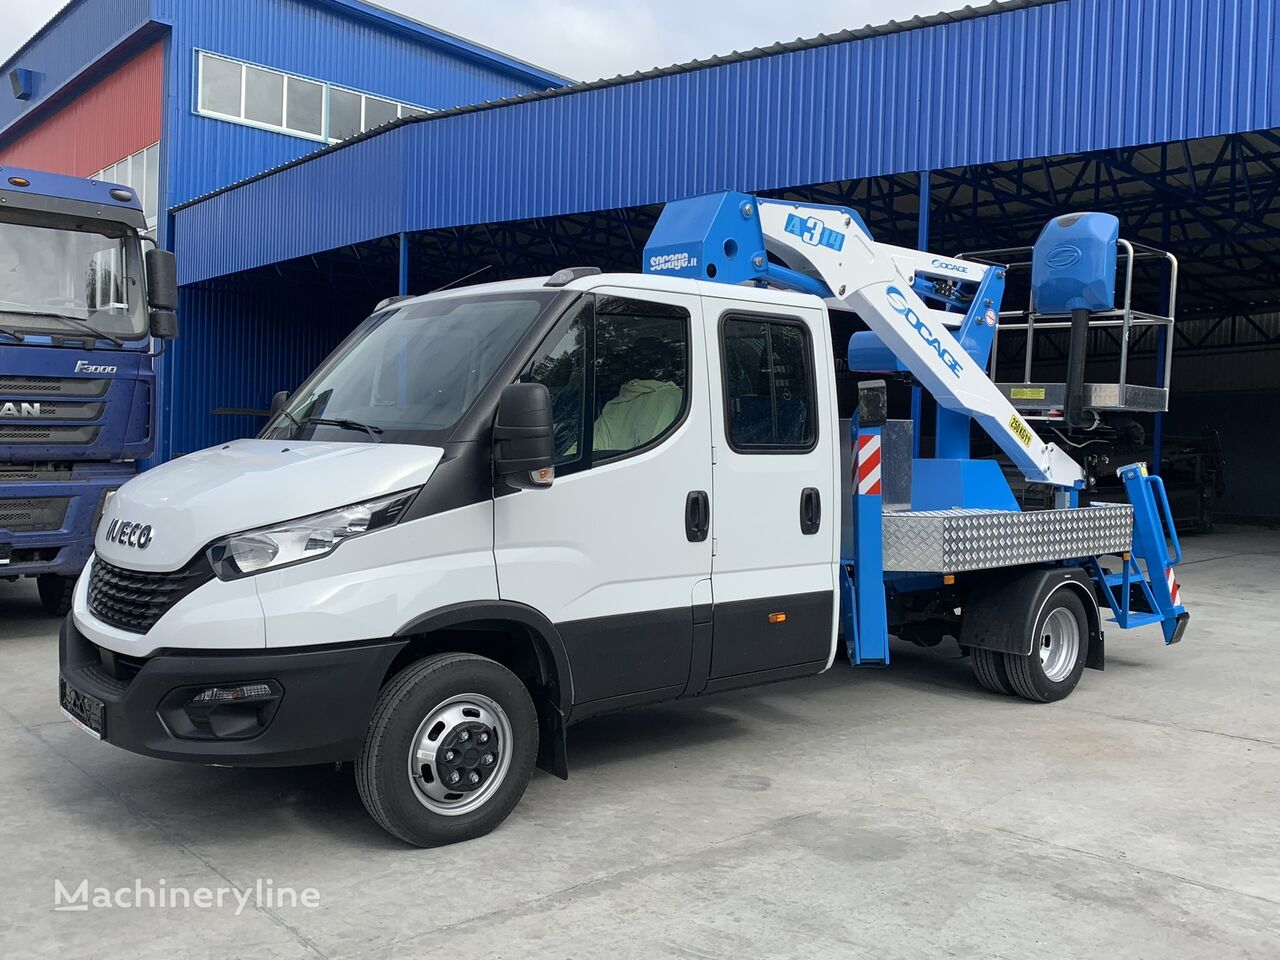 new Socage A314 na shassi IVECO Daily (kabina 7 mest) bucket truck